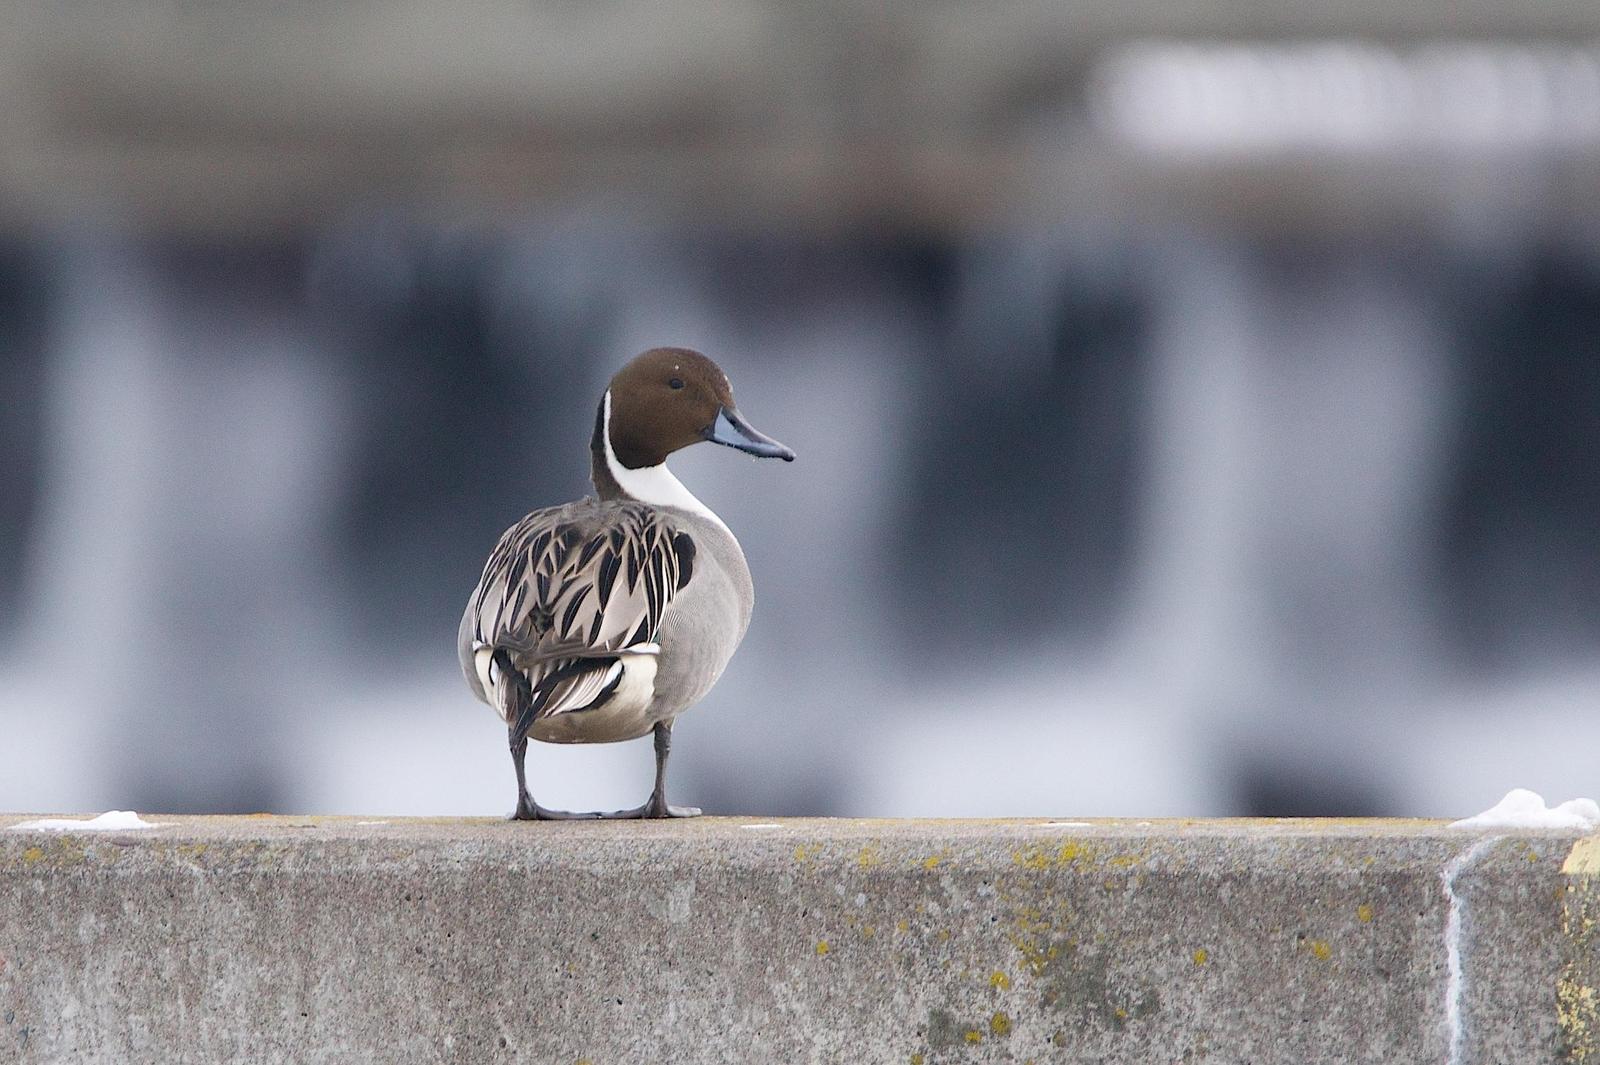 Northern Pintail Photo by Gerald Hoekstra